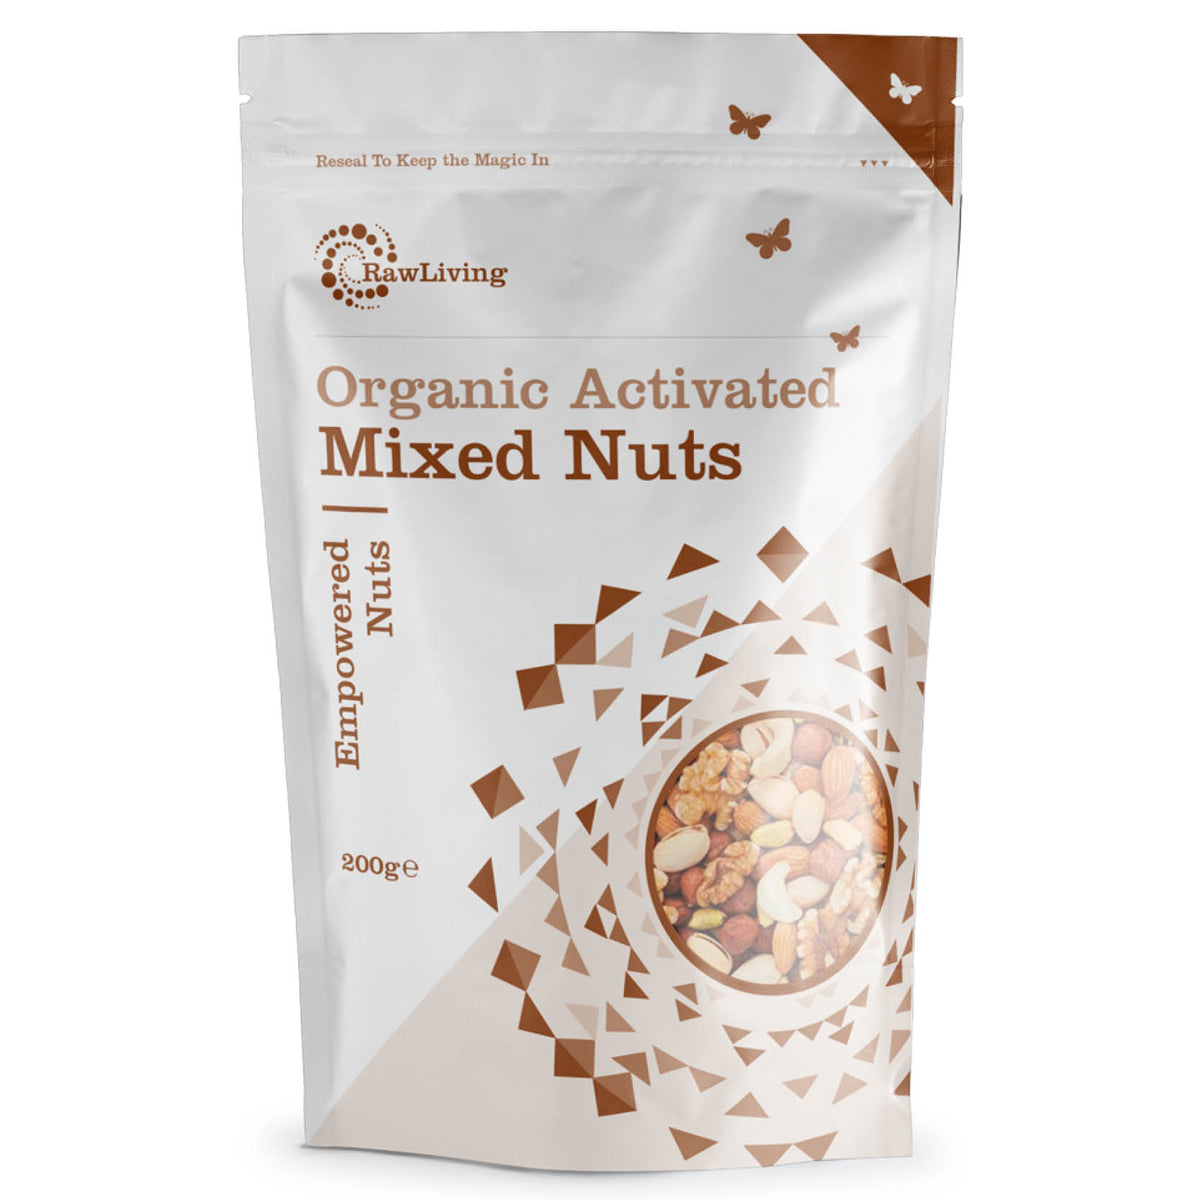 Organic Activated Mixed Nuts (200g, 1kg) | Raw Living UK | Raw Living Organic Activated Mixed Nuts: we activate these nuts to release the Phytic Acid &amp; Enzyme Inhibitors. A blend of Almonds, Brazils, Pecans &amp; Walnuts.